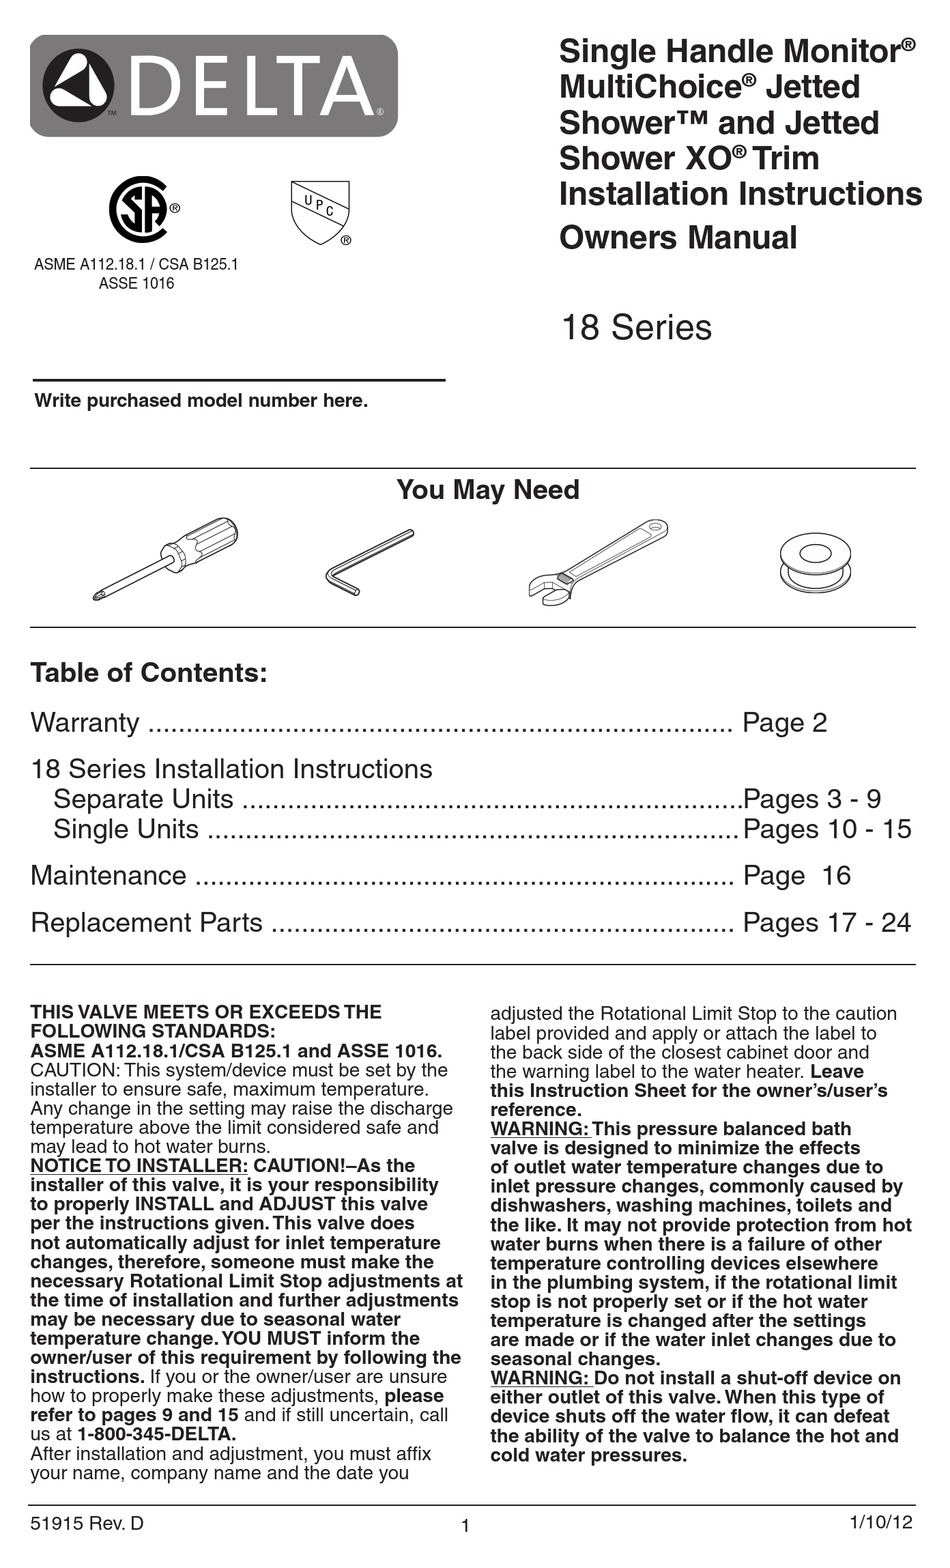 DELTA JETTED SHOWER INSTALLATION INSTRUCTIONS MANUAL Pdf Download